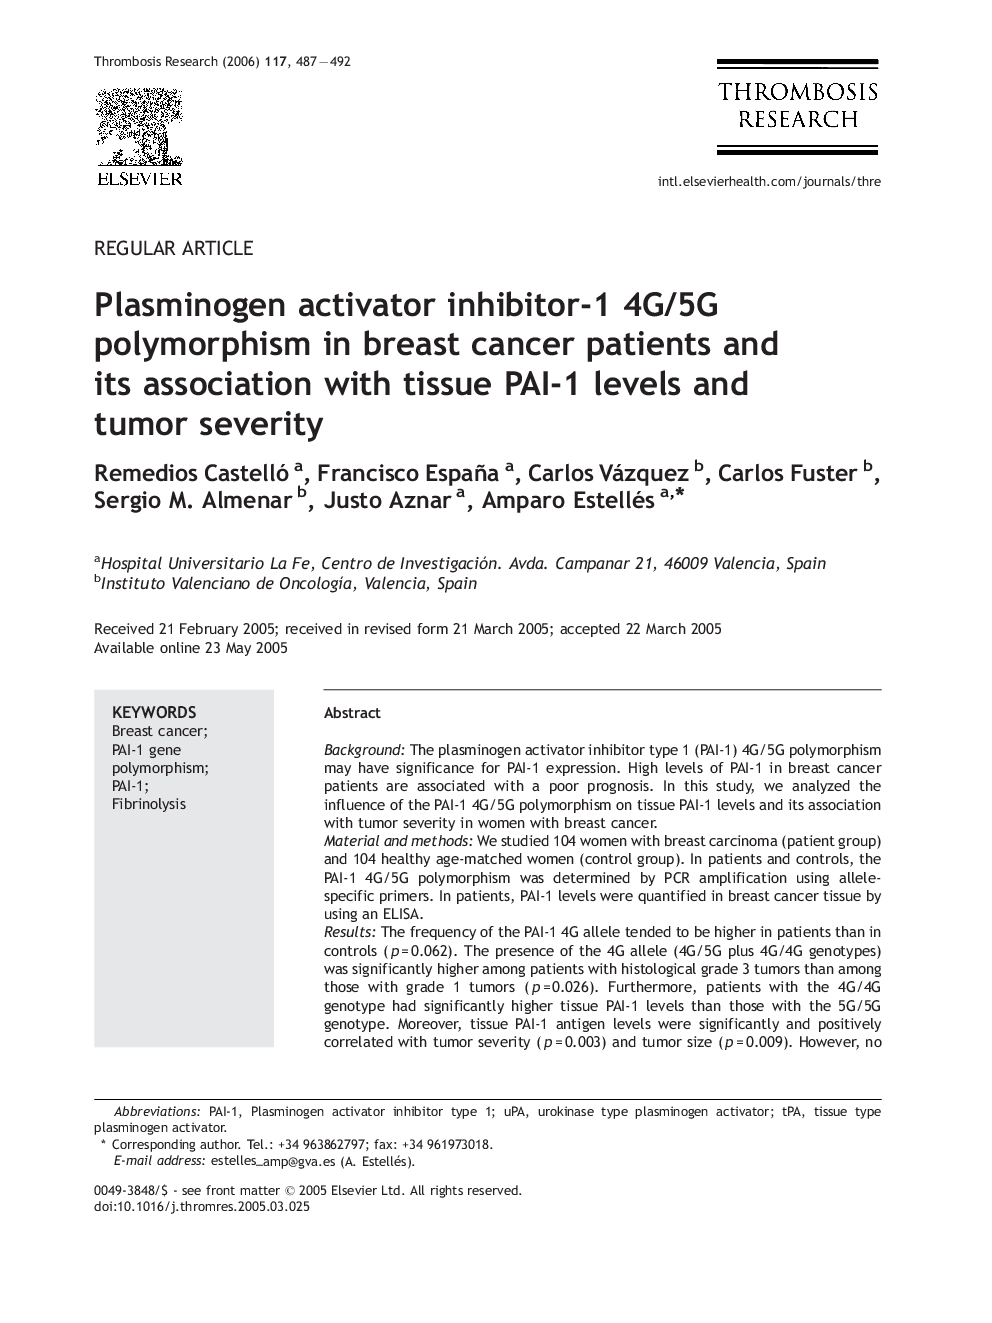 Plasminogen activator inhibitor-1 4G/5G polymorphism in breast cancer patients and its association with tissue PAI-1 levels and tumor severity